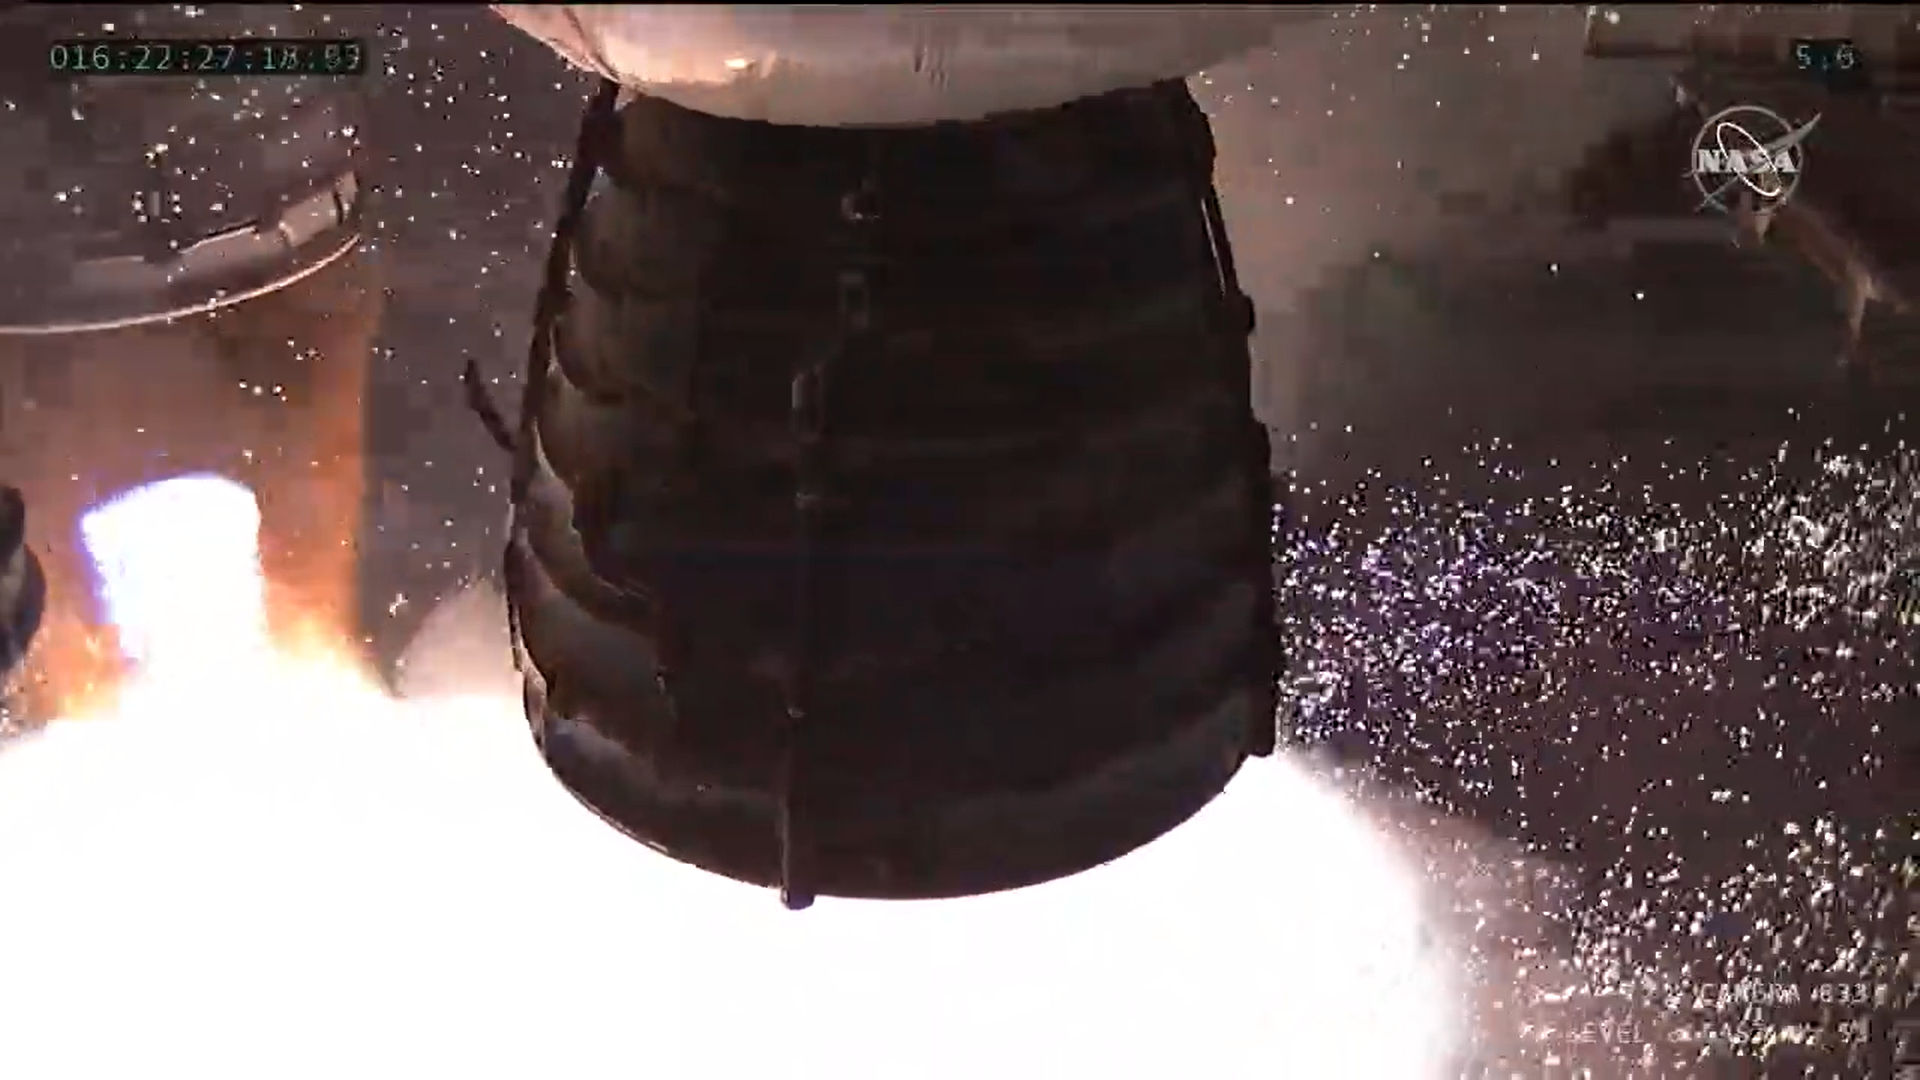 On Jan. 16, 2021, NASA fired up four RS-25 engines of the core stage for the agency’s Space Launch System (SLS) rocket